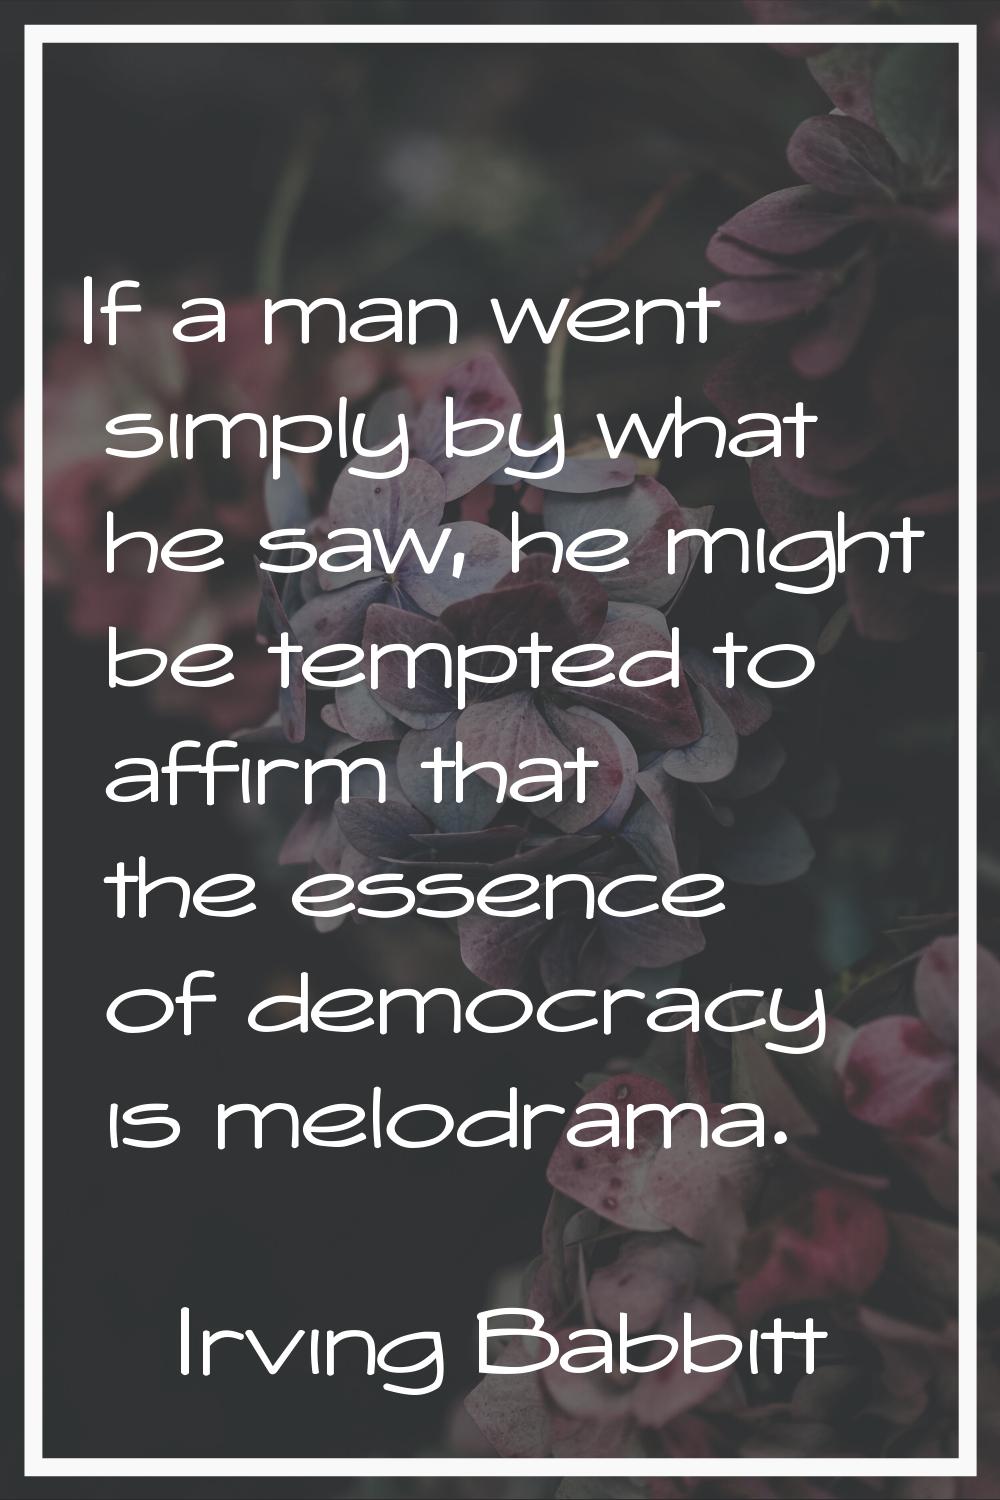 If a man went simply by what he saw, he might be tempted to affirm that the essence of democracy is